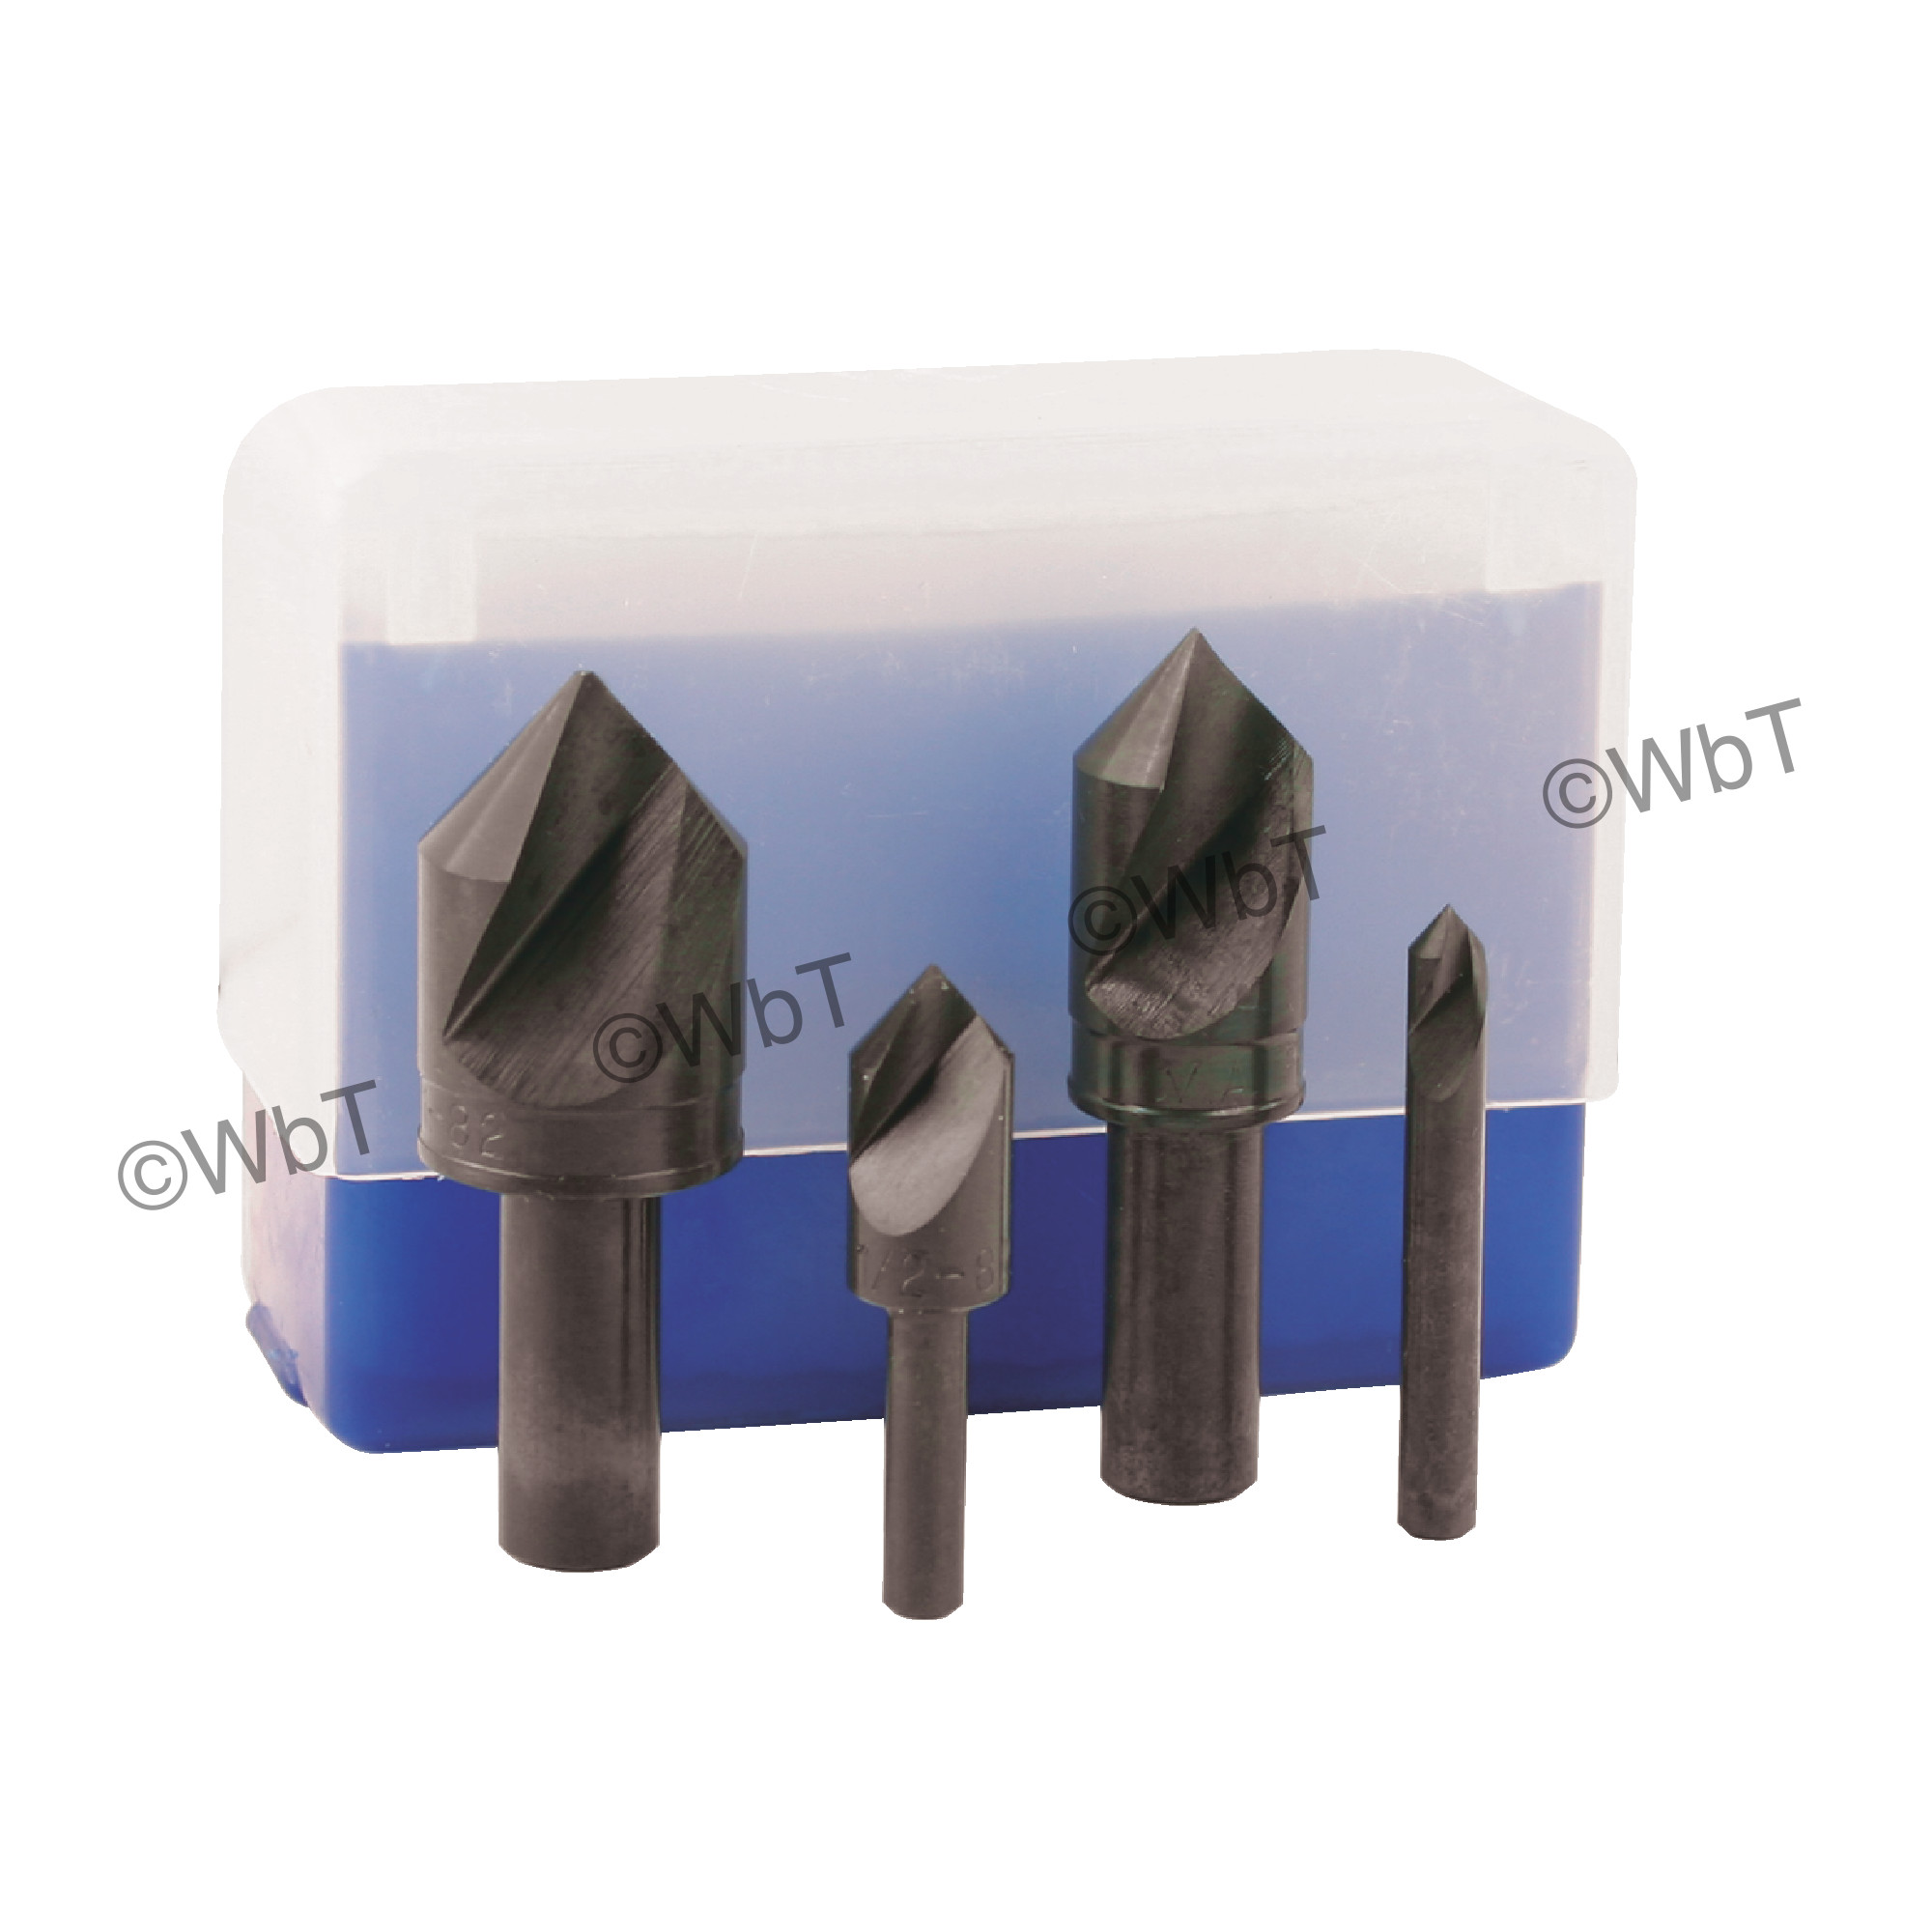 M.A. FORD 1 Flute 4 Piece 1/4" to 1" High Speed Steel 82&#176; Included Angle Countersink Set